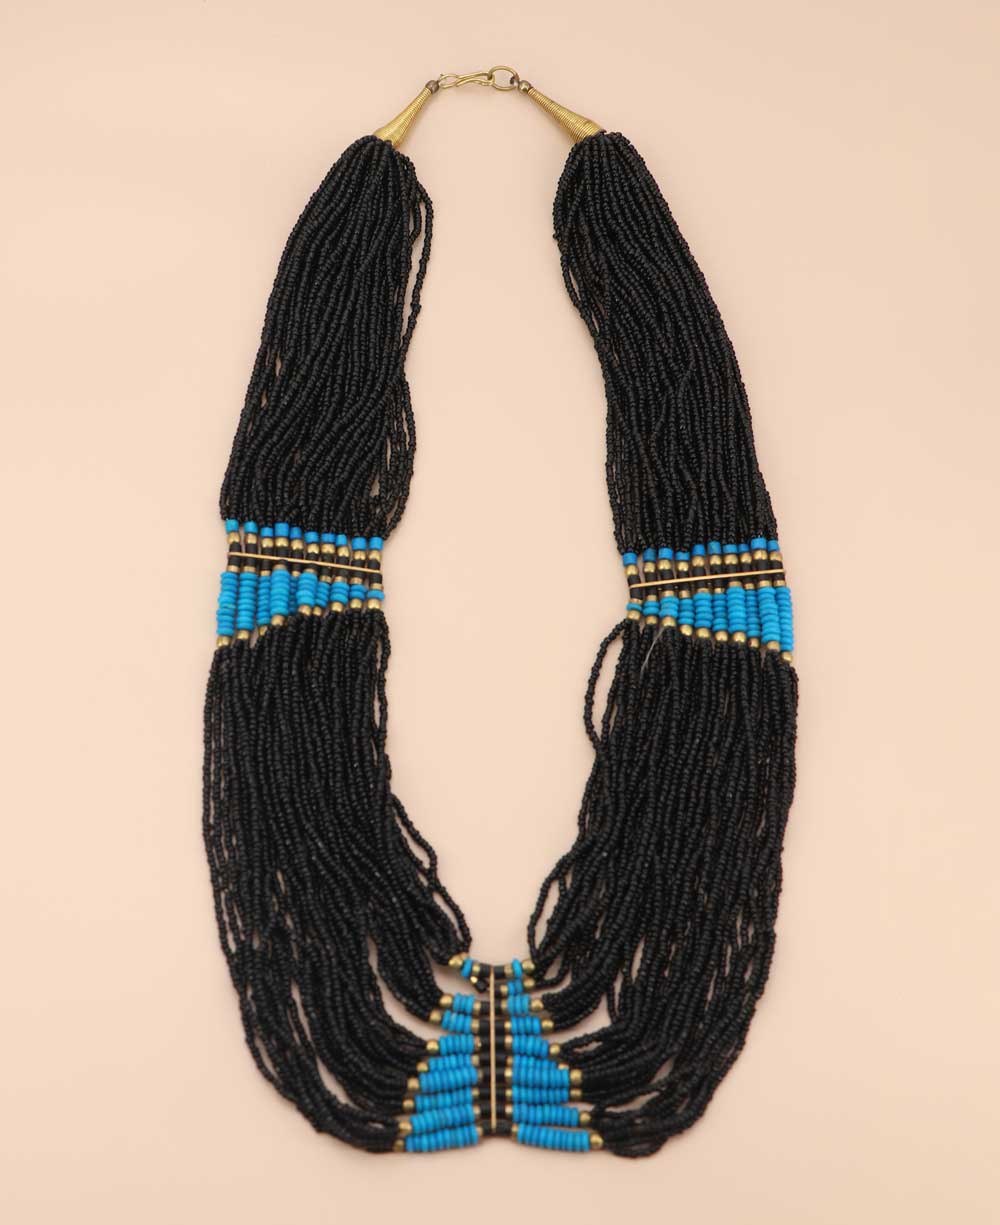 Beaded Necklace in black